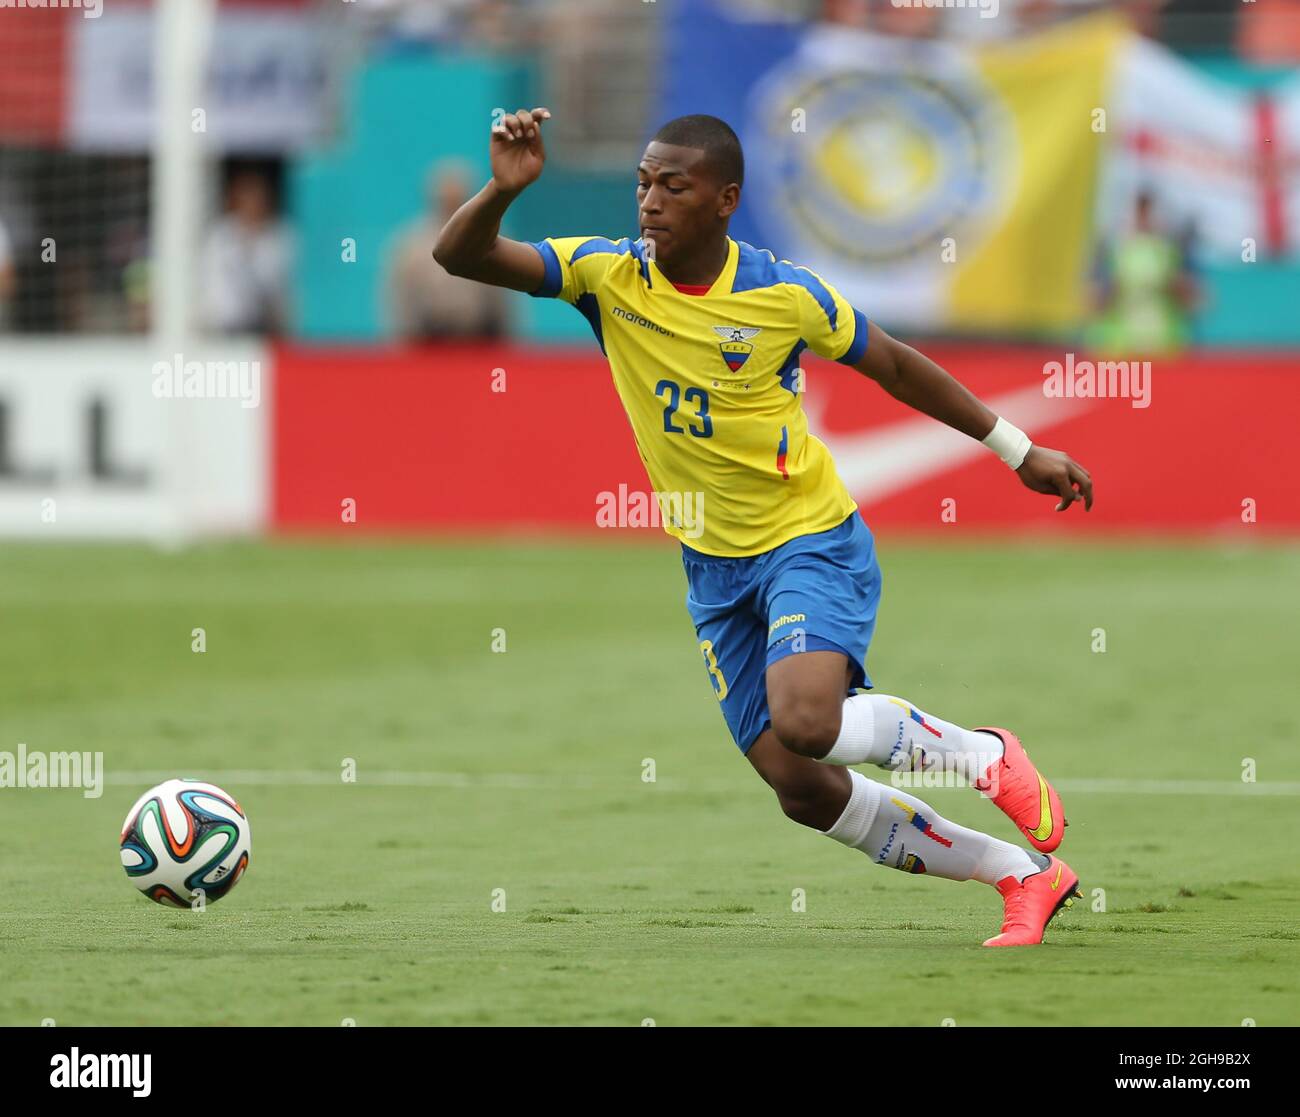 Ecuador's Carlos Gruezo in action during the International Friendly match between England and Ecuador held at Sun Life Stadium in Miami, USA on June 4, 2014. Pic David Klein/Sportimage. Stock Photo